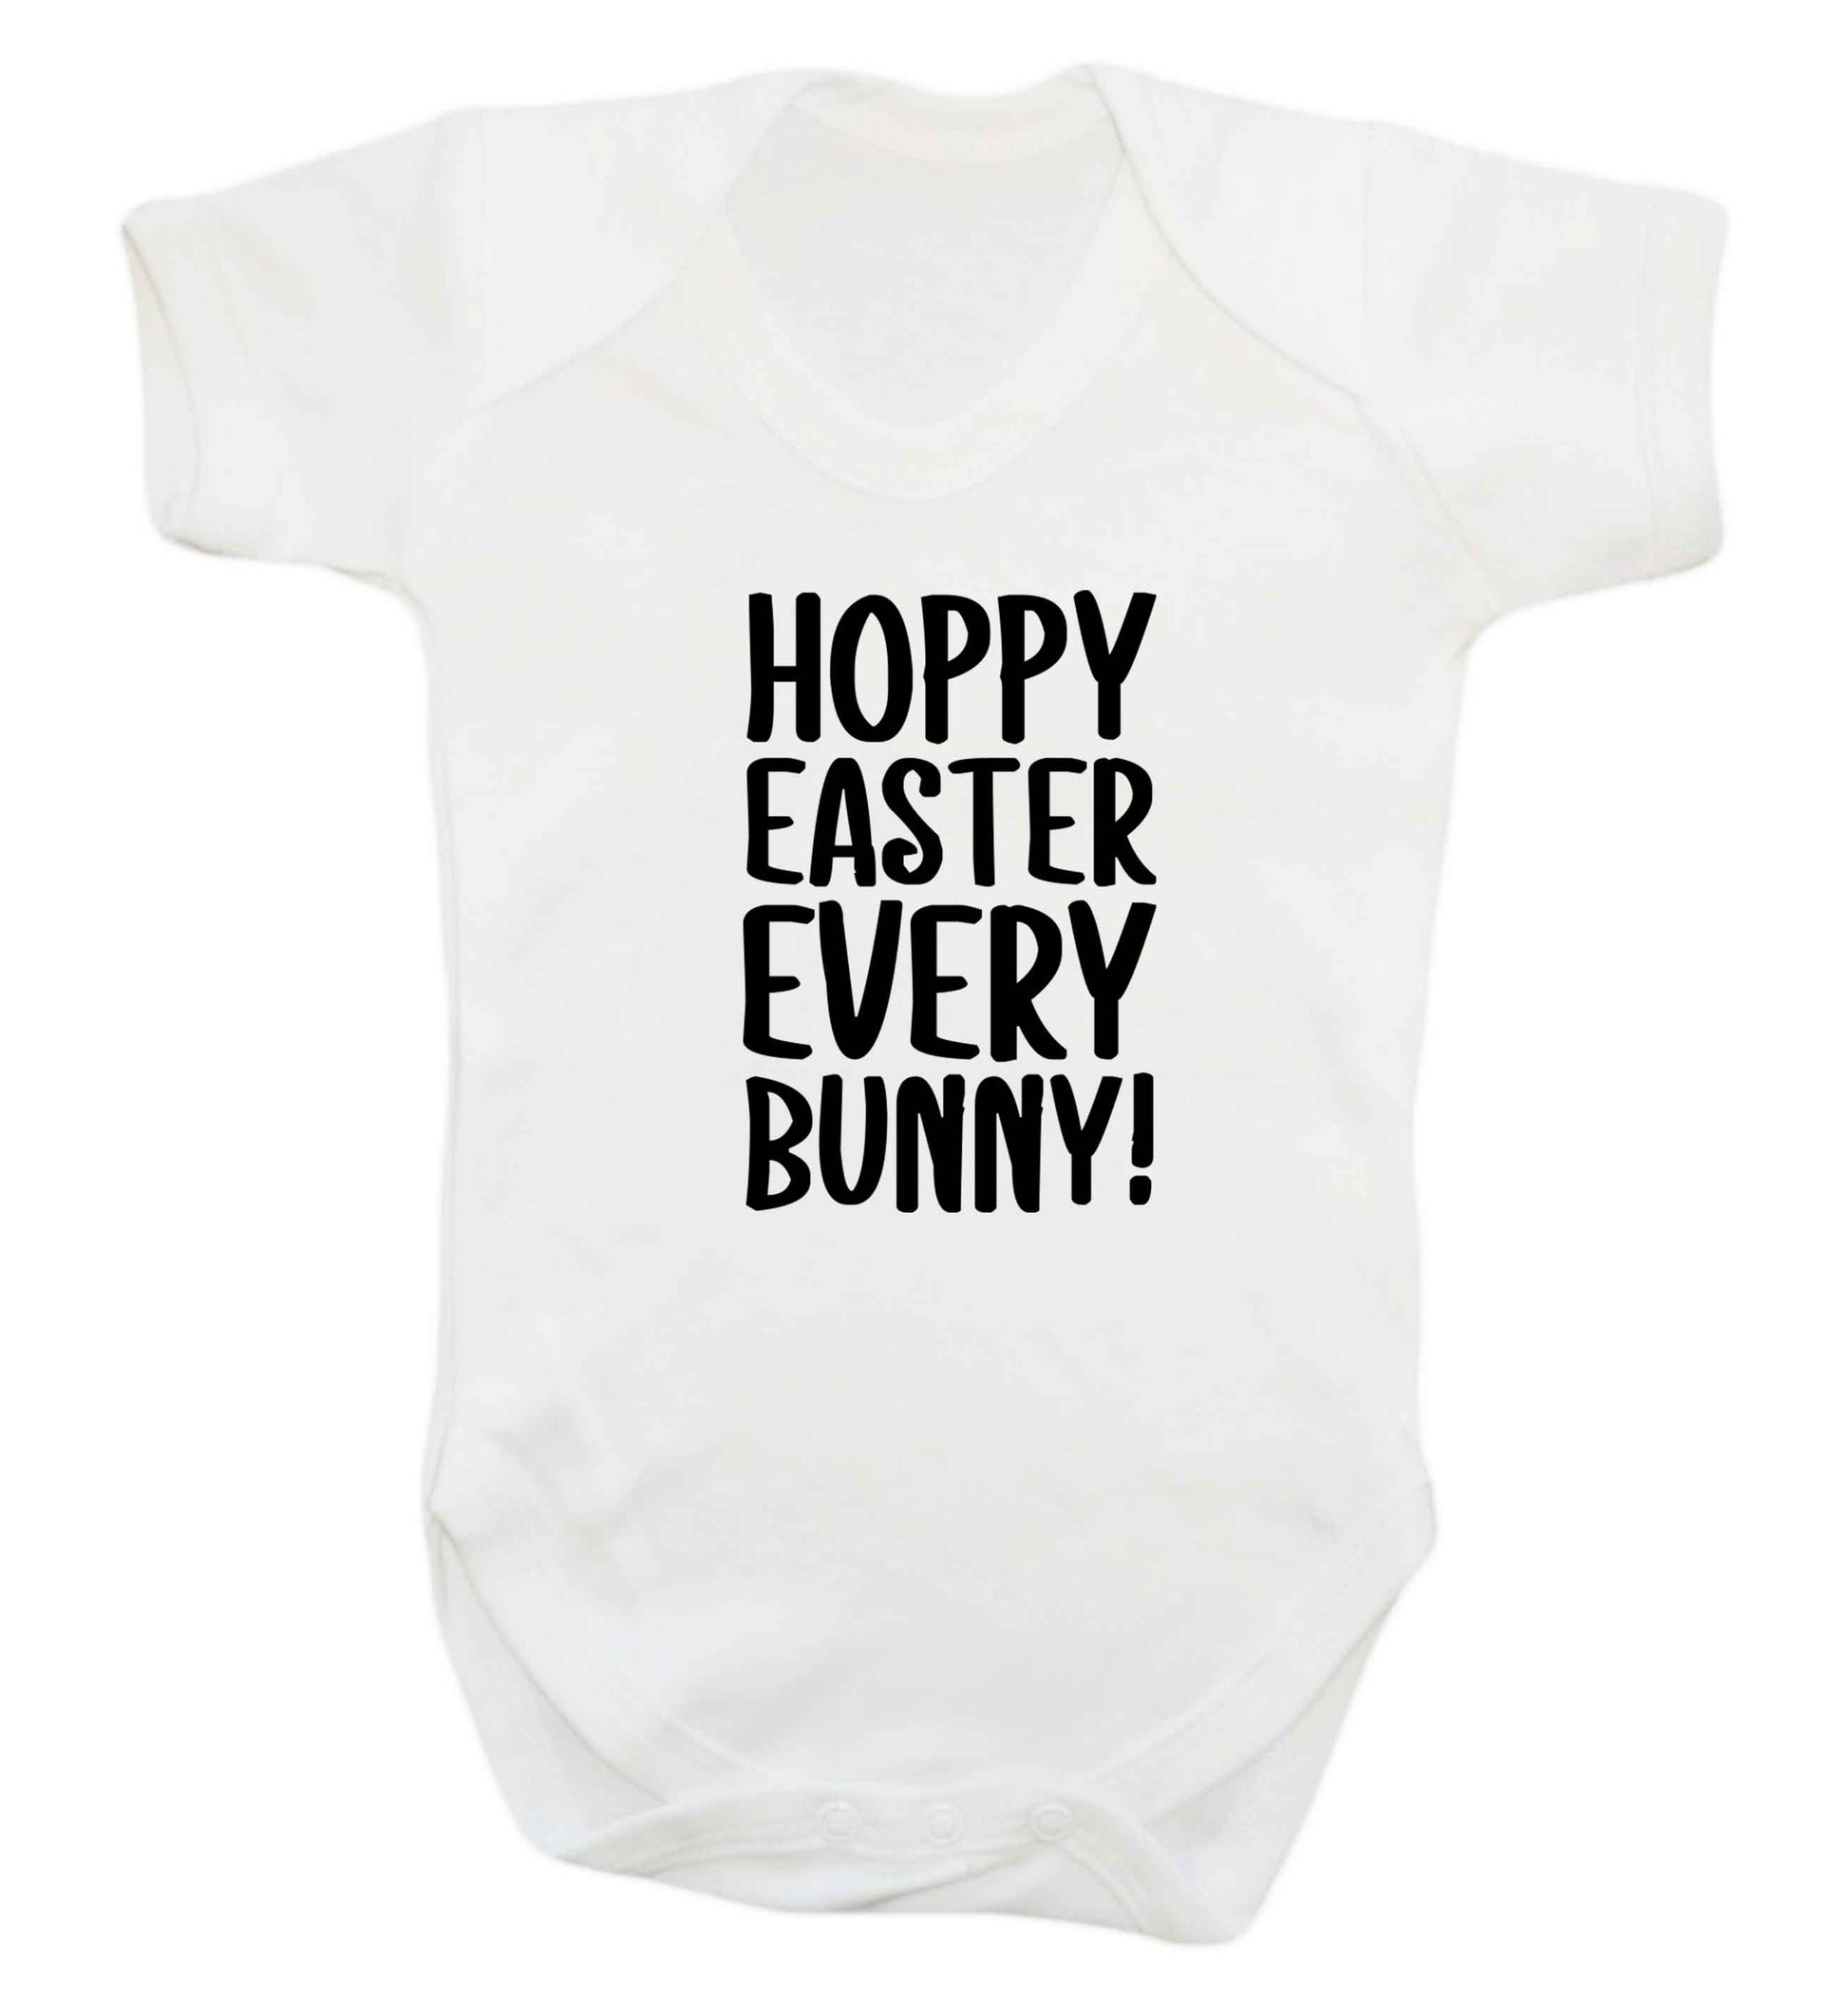 Hoppy Easter every bunny! baby vest white 18-24 months